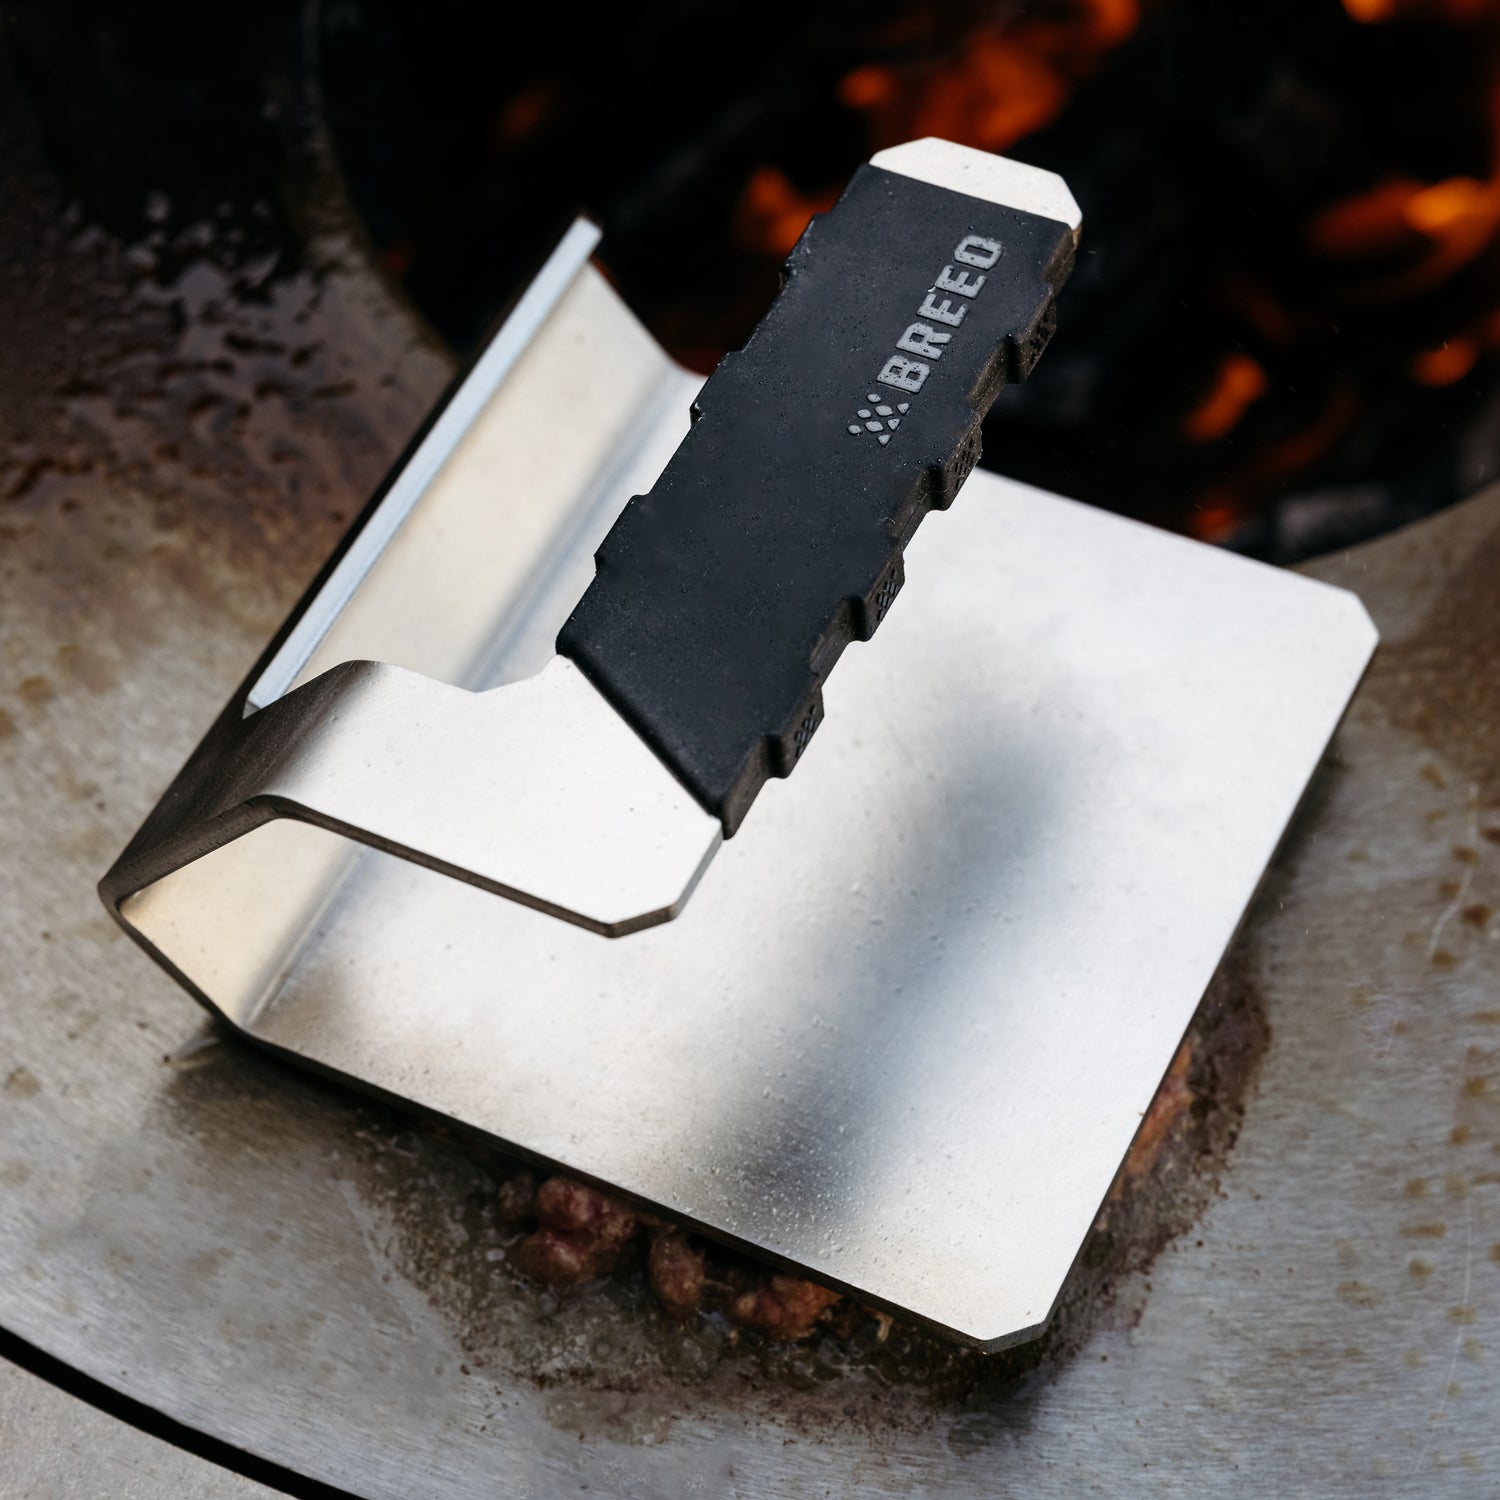 A Griddle Press sits on a sear-plate with coals visible below.